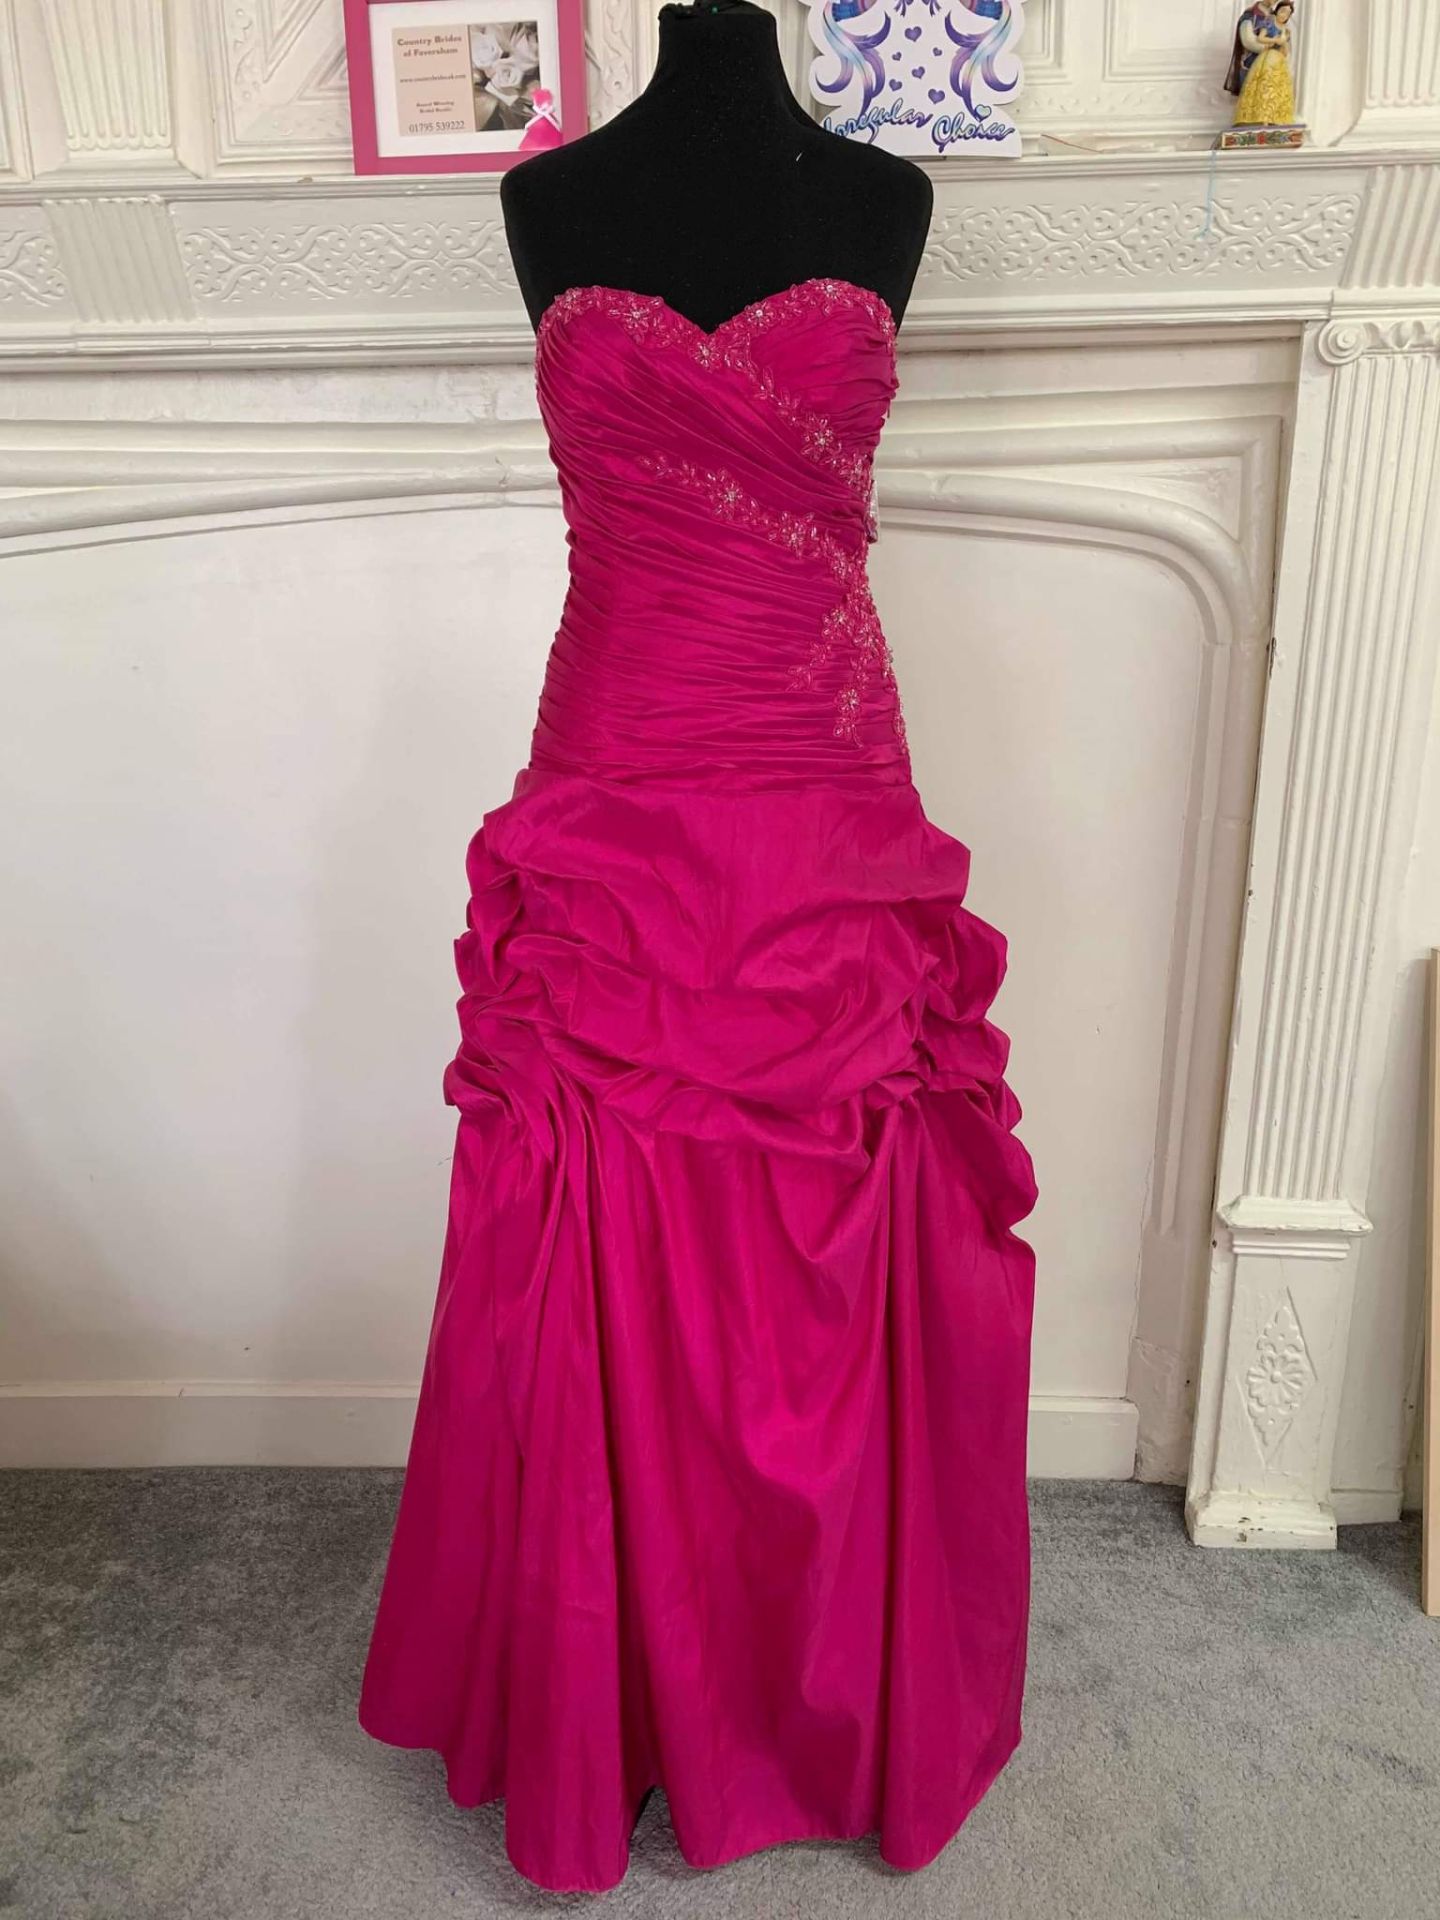 Bridesmaid Or Prom Dresses From Richard Designs Mixed Sizes and Colours. 10 Dresses - Image 2 of 2